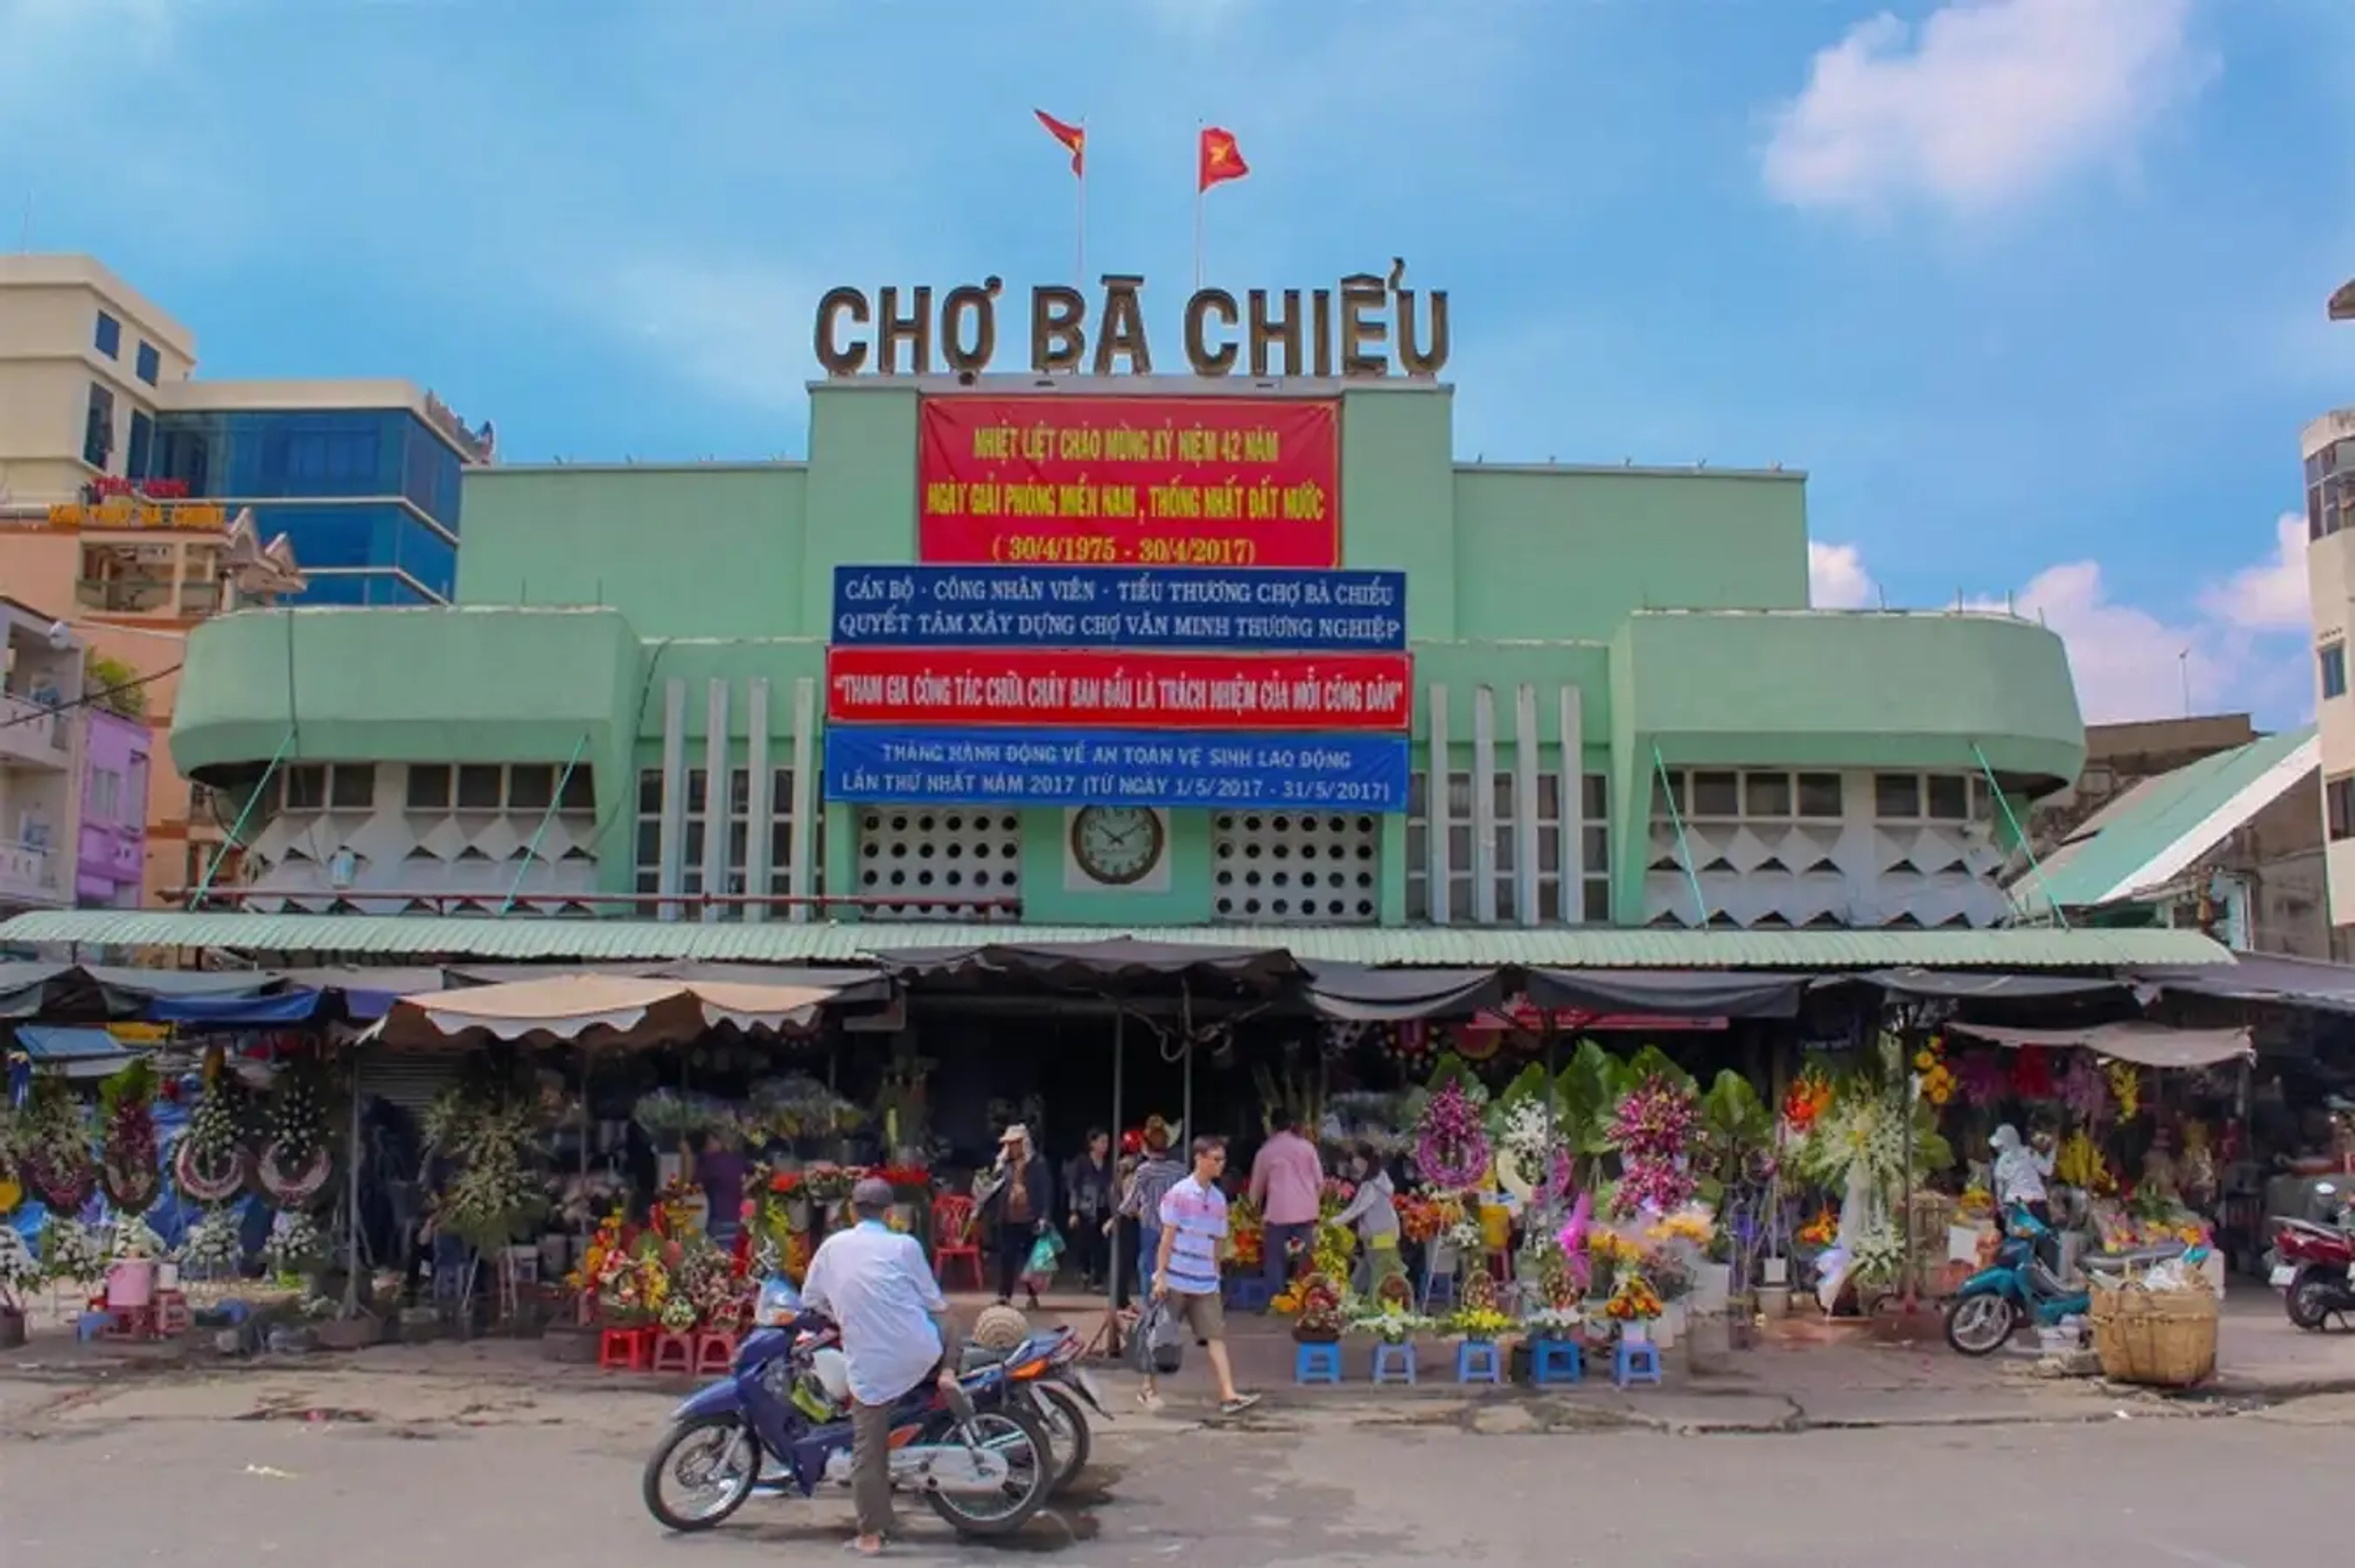  Ba Chieu Market: An ideal meeting place for shopping enthusiasts